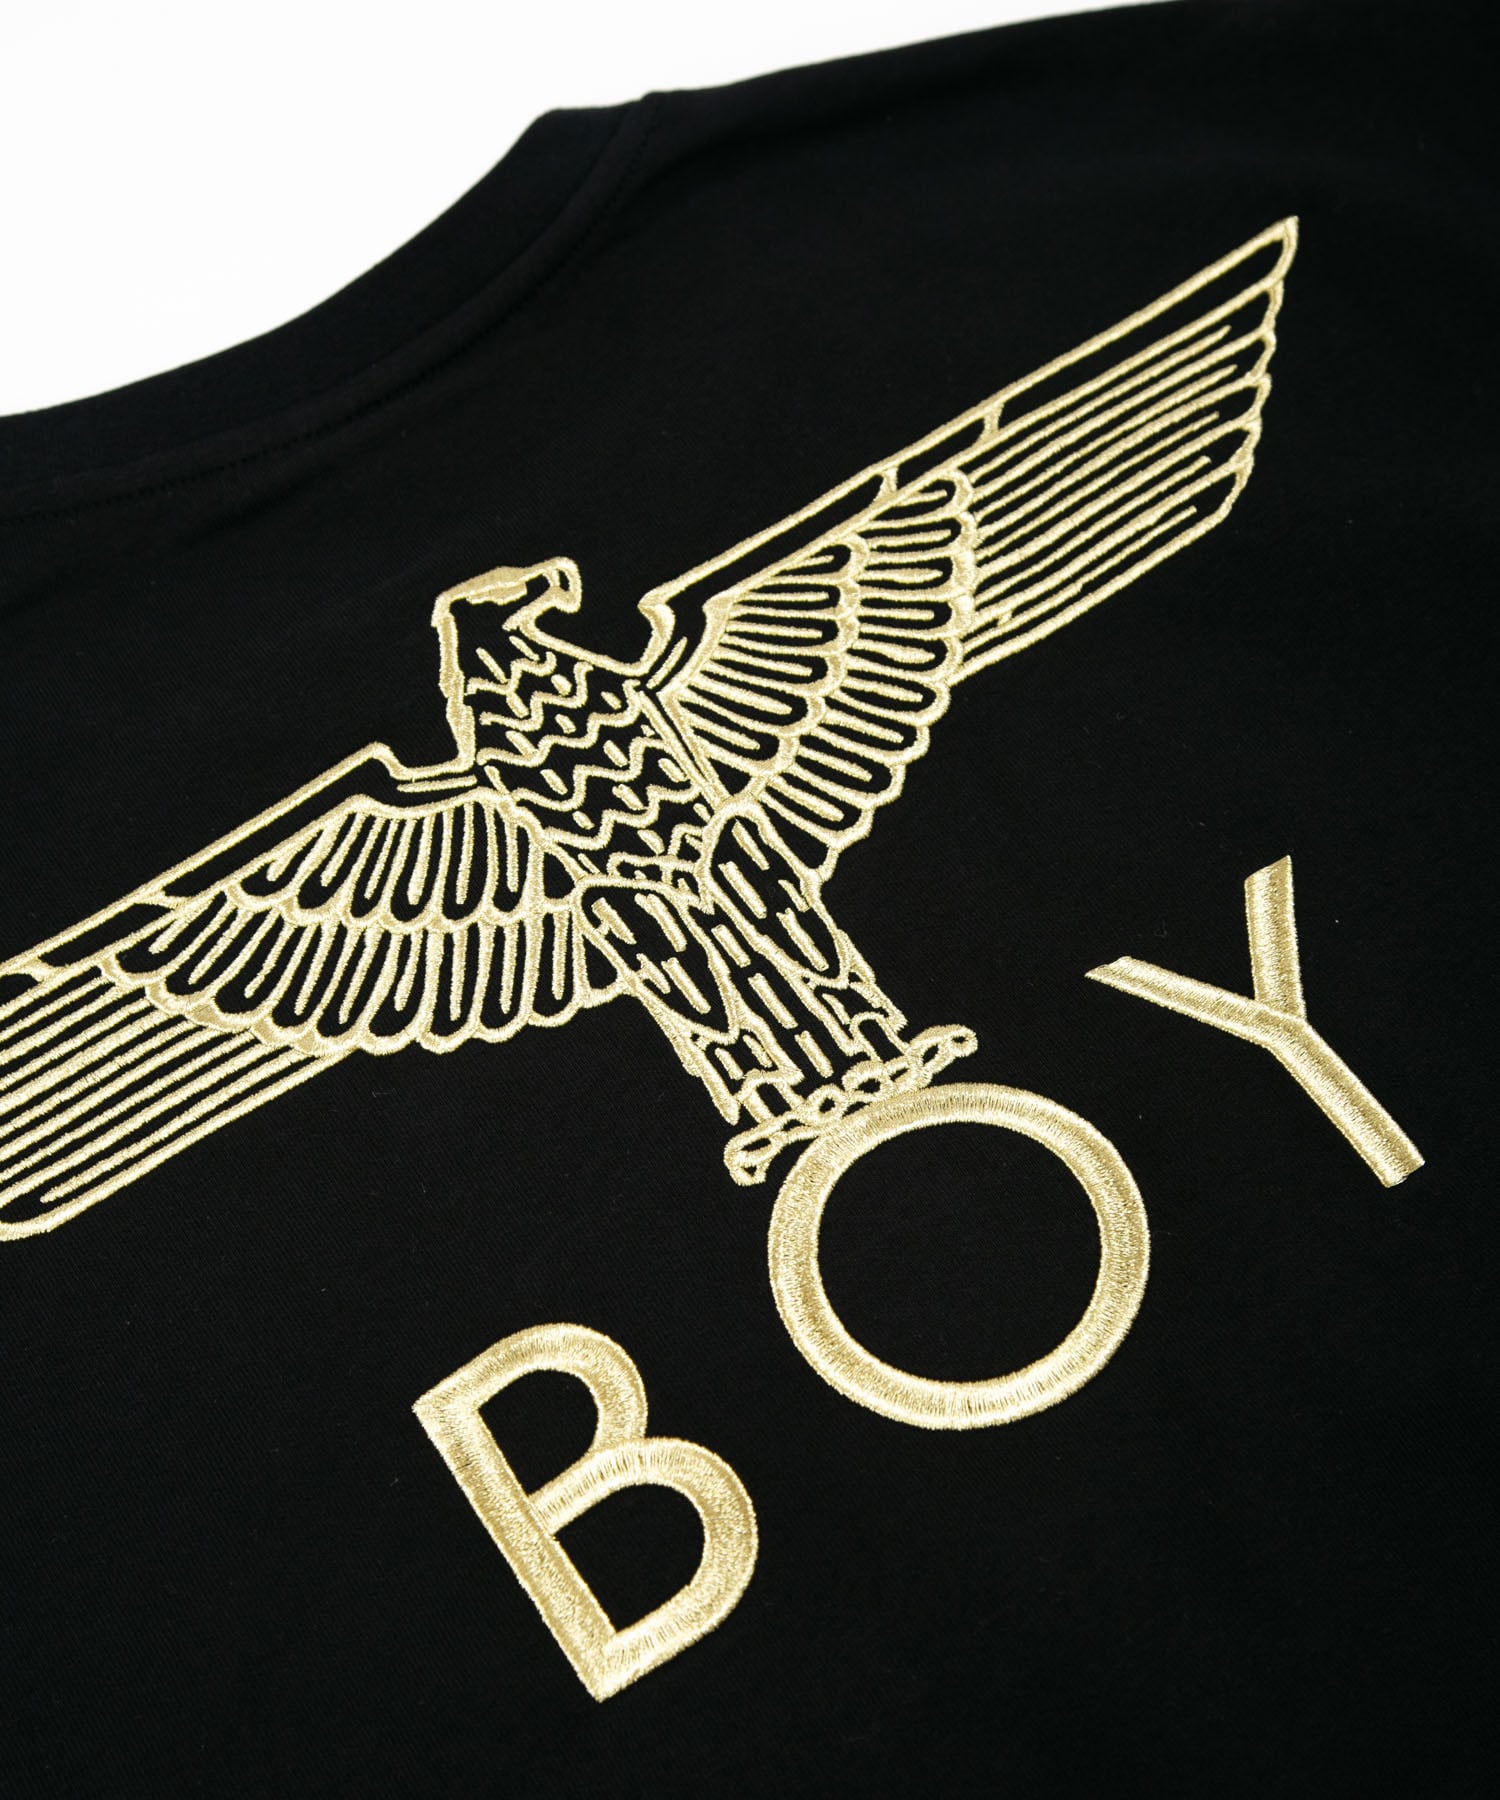 BOY LONDON 【 GOLDEN EAGLE EMBROIDERY CREW NECK SWEAT 】 | ReP ON 